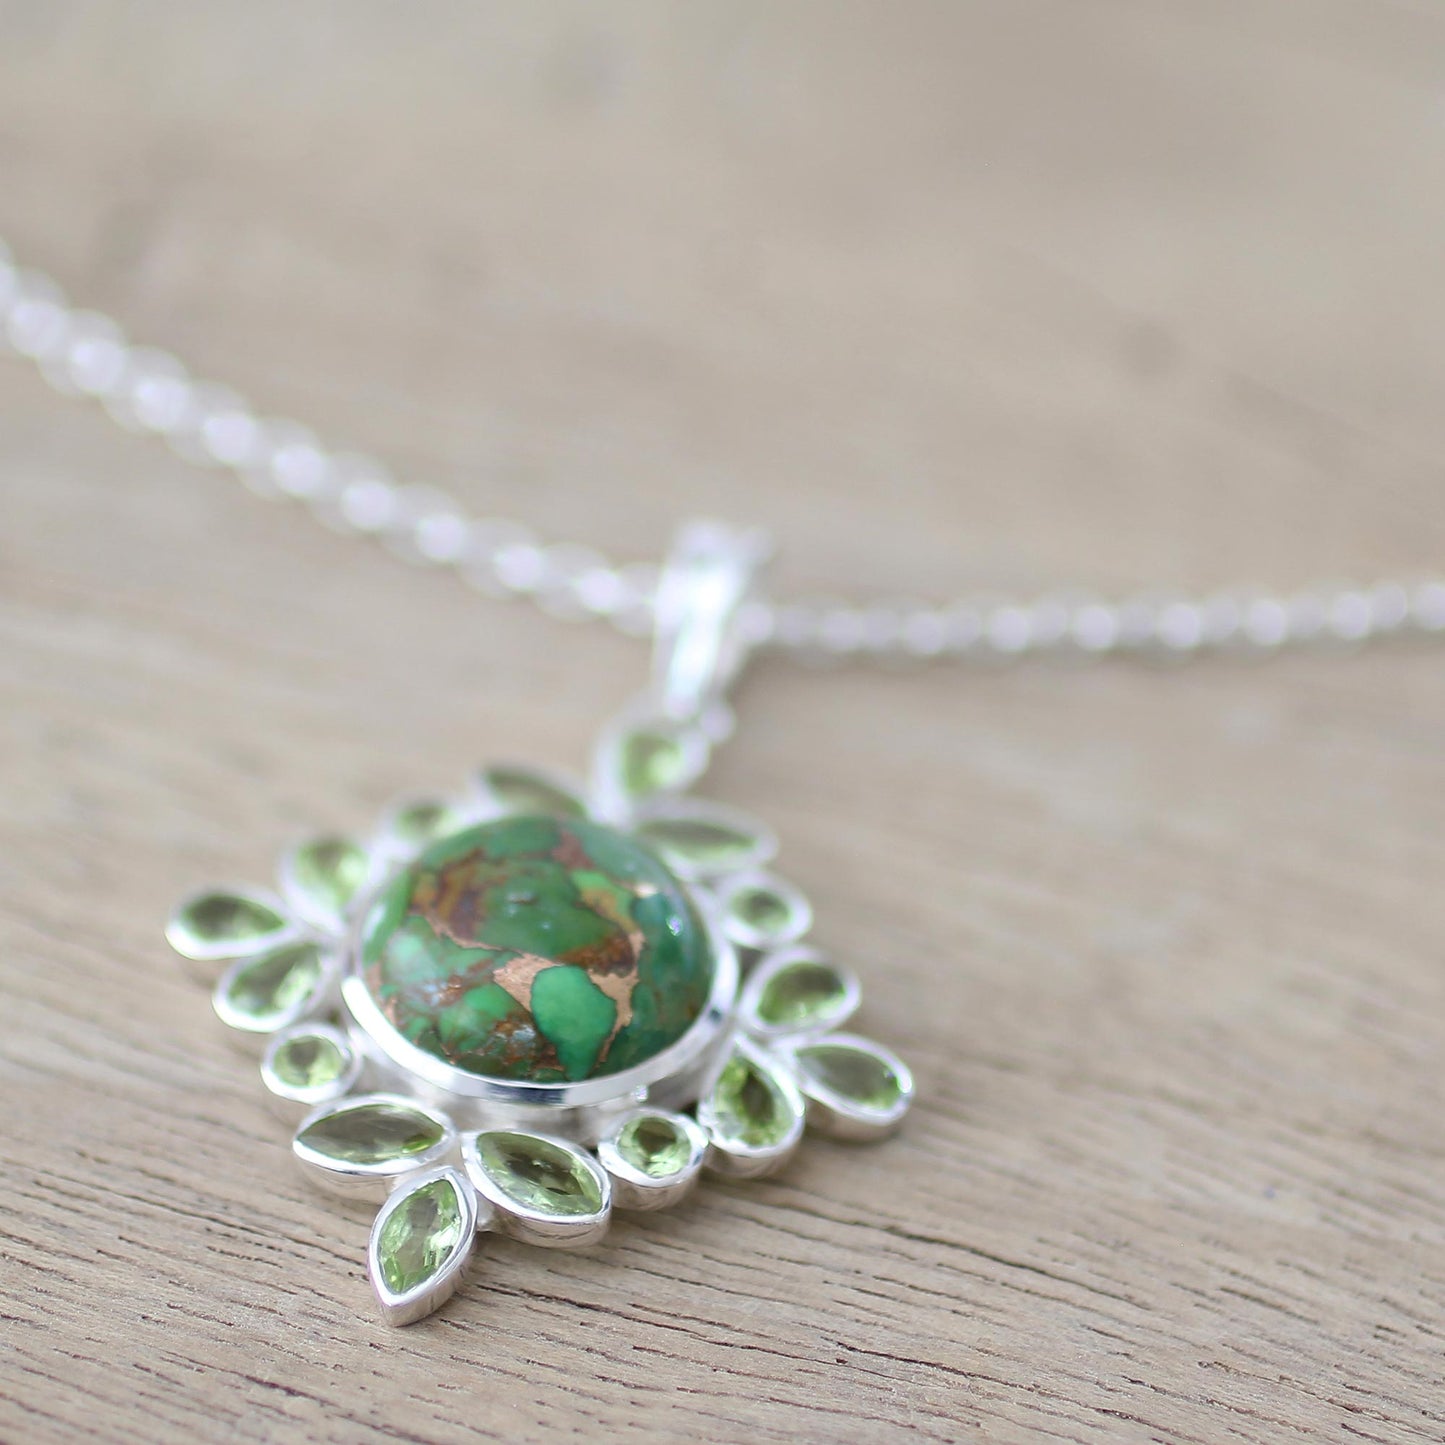 Bright Fascination Handcrafted Green Turquoise and Peridot Pendant Necklace